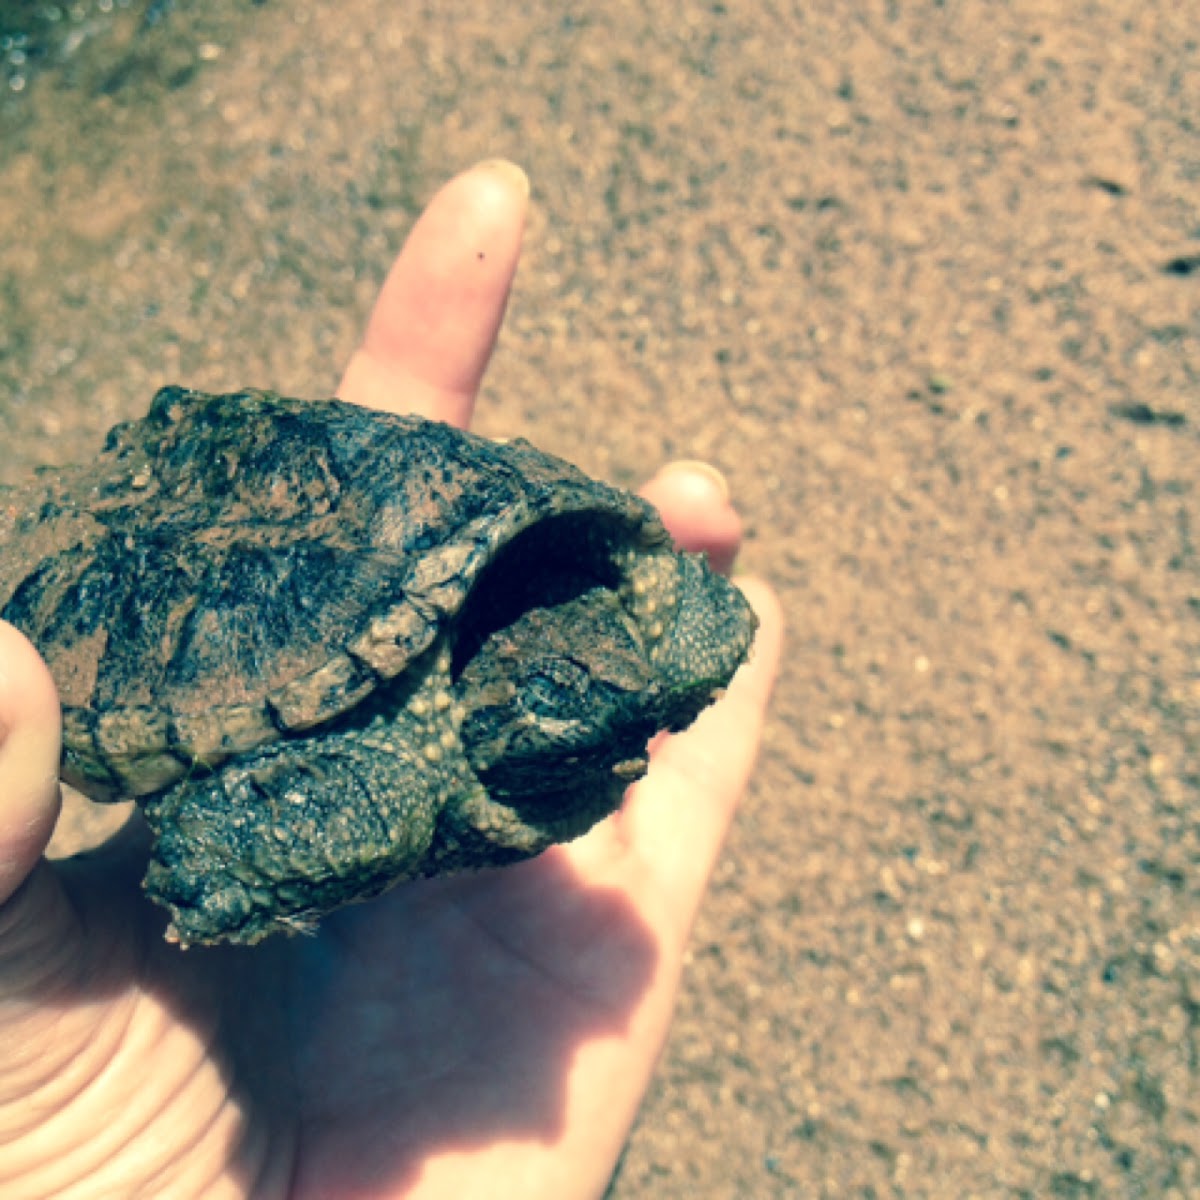 common snapping turtle